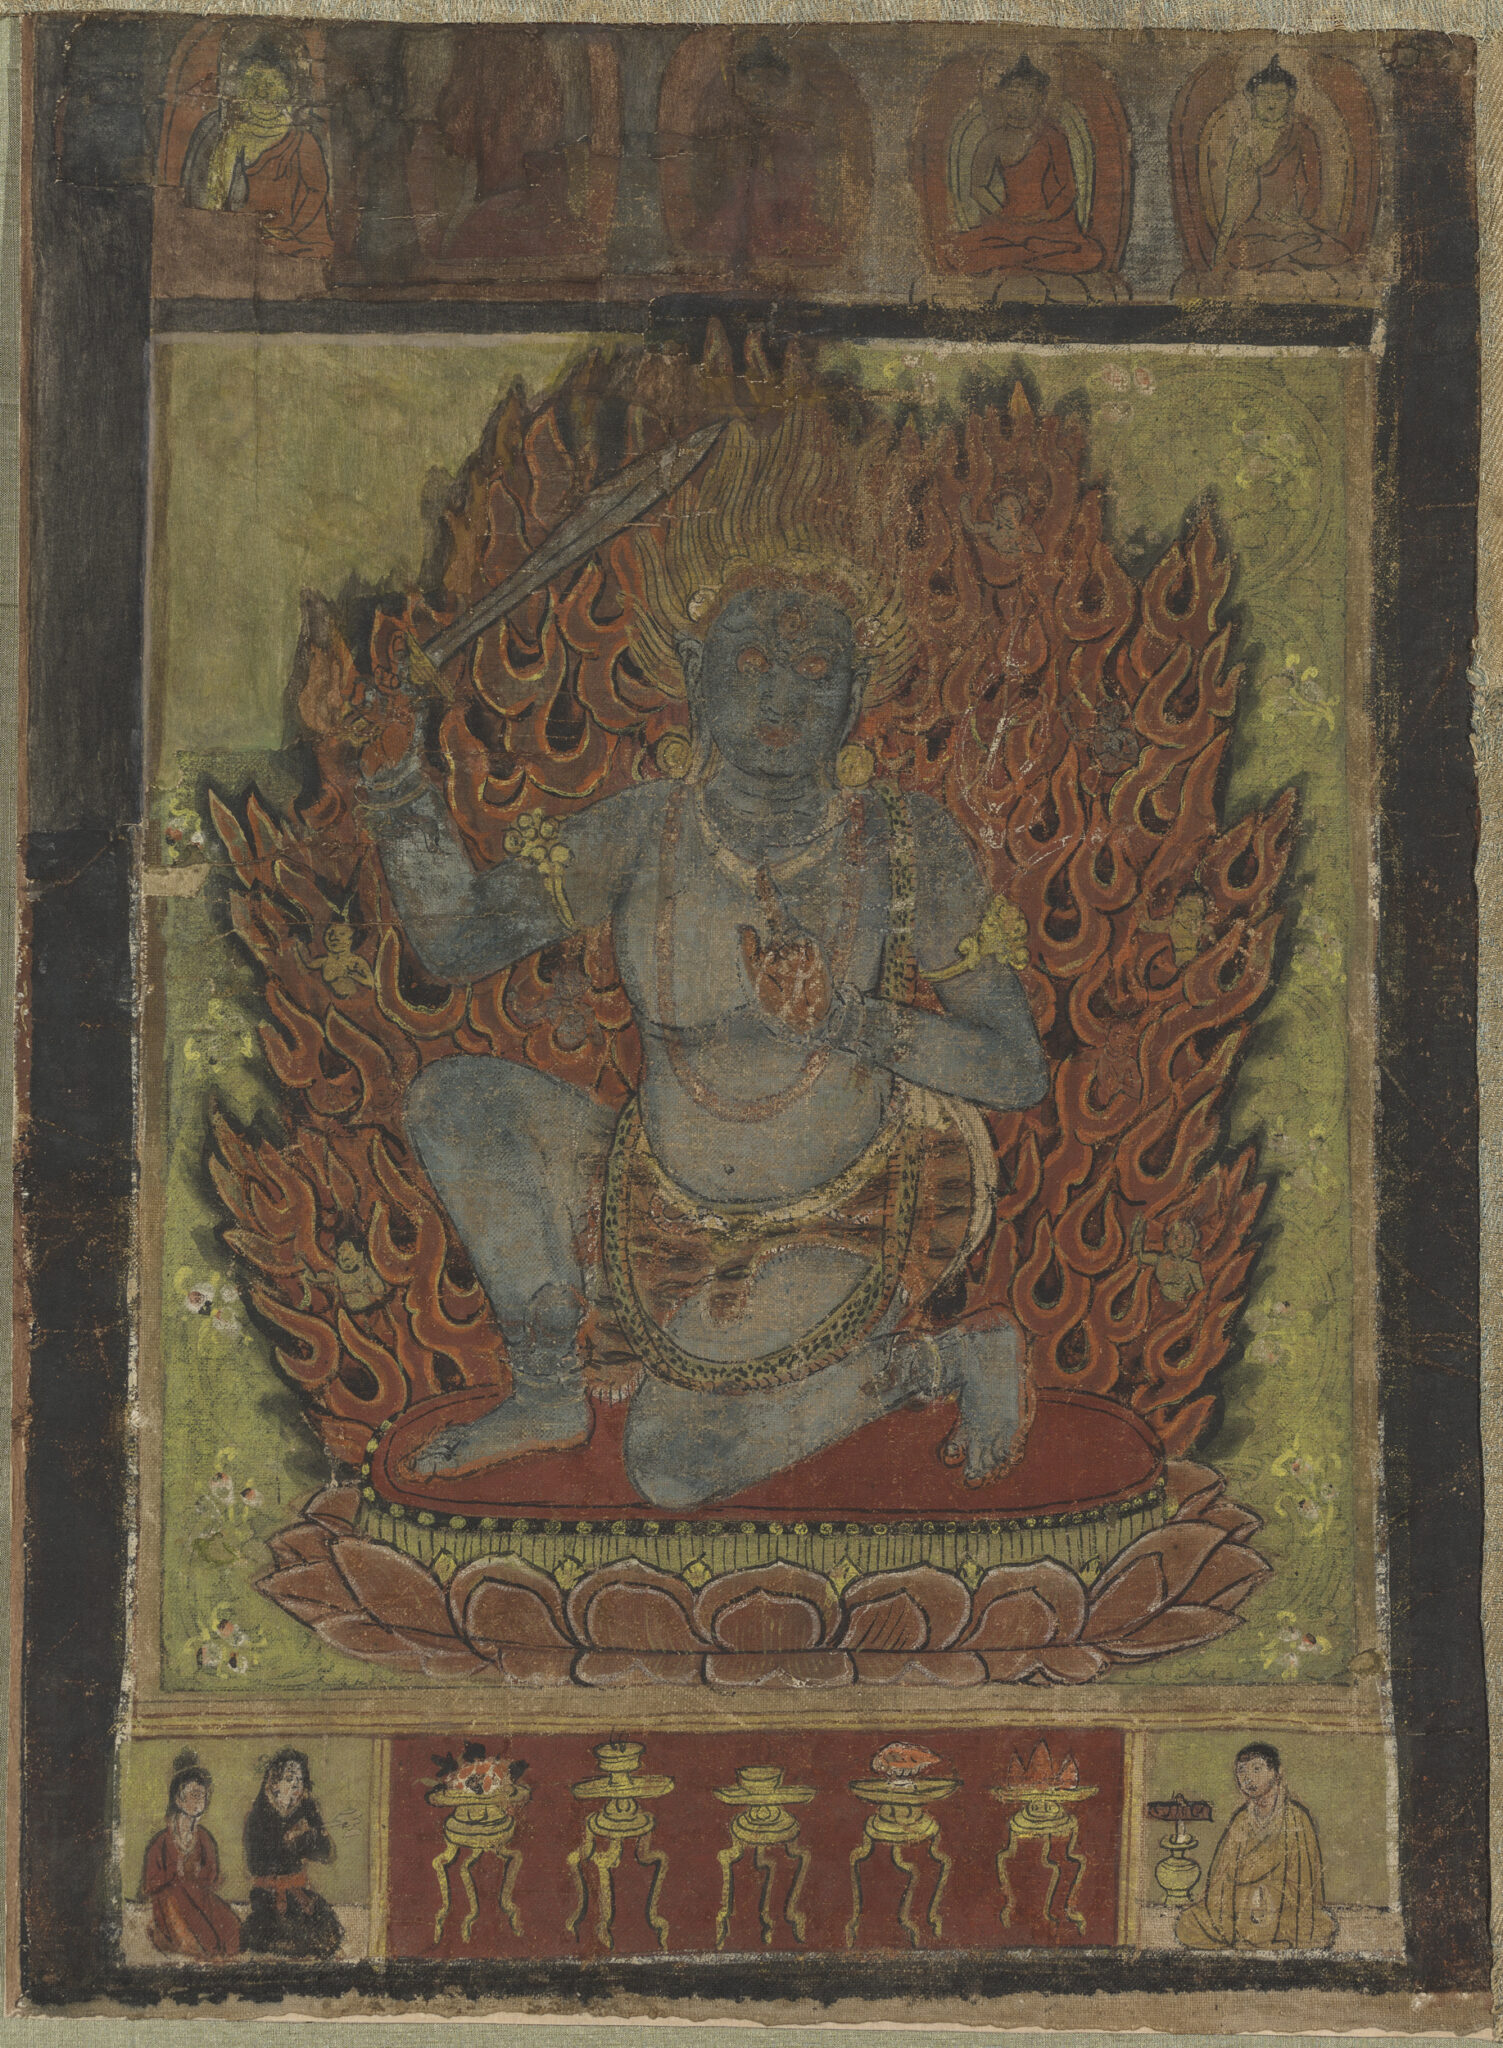 Blue-skinned deity kneeling in dynamic pose before firey nimbus; register at bottom features ritual implements and supplicants